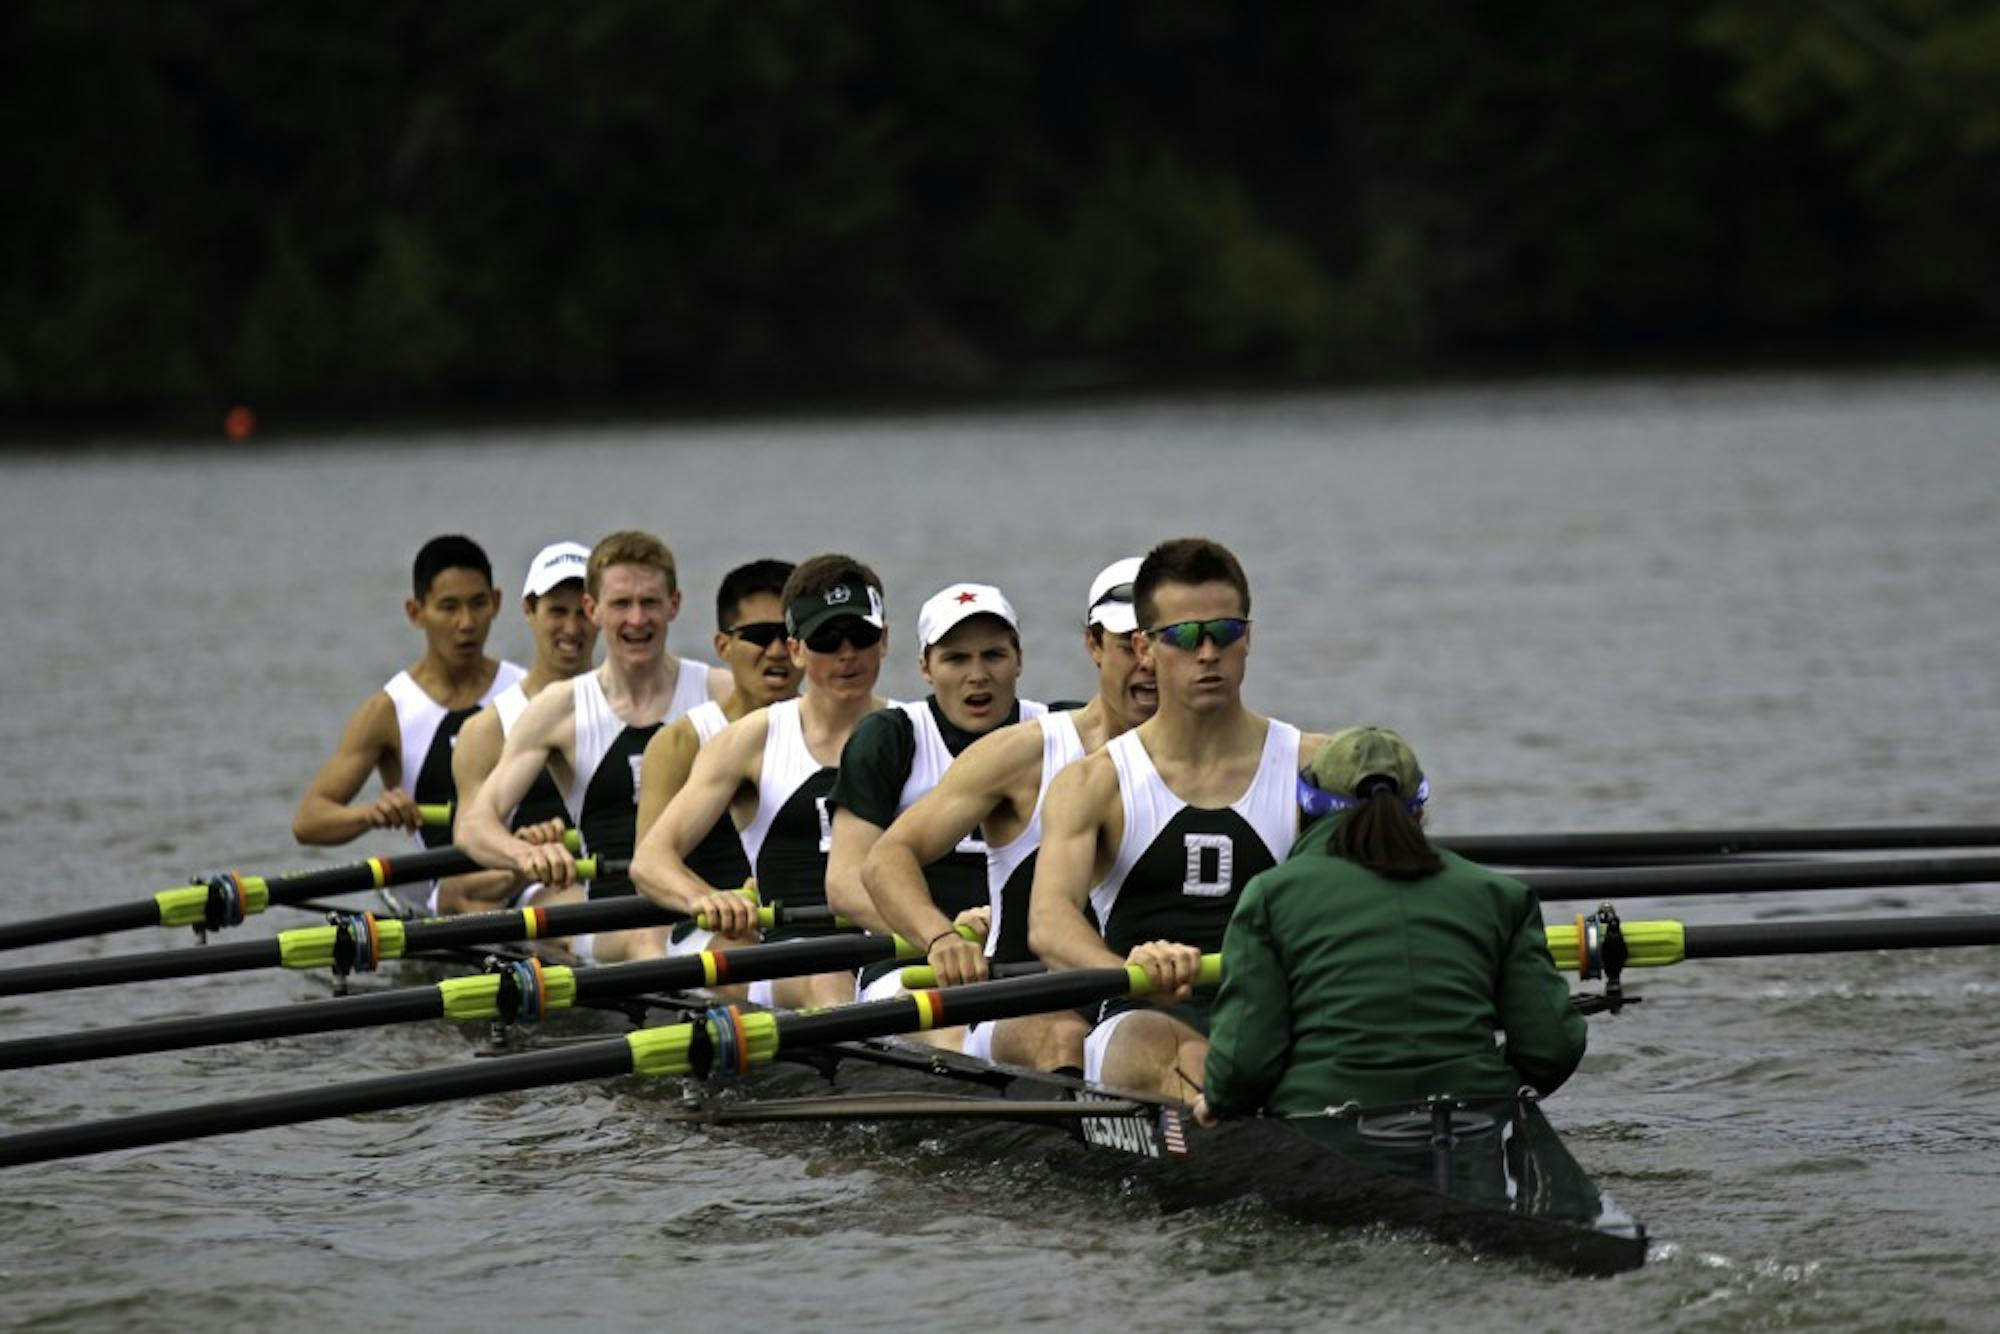 The men’s lightweight crew team looks to improve on last year’s eighth-place finish at the Head of the Charles this weekend.